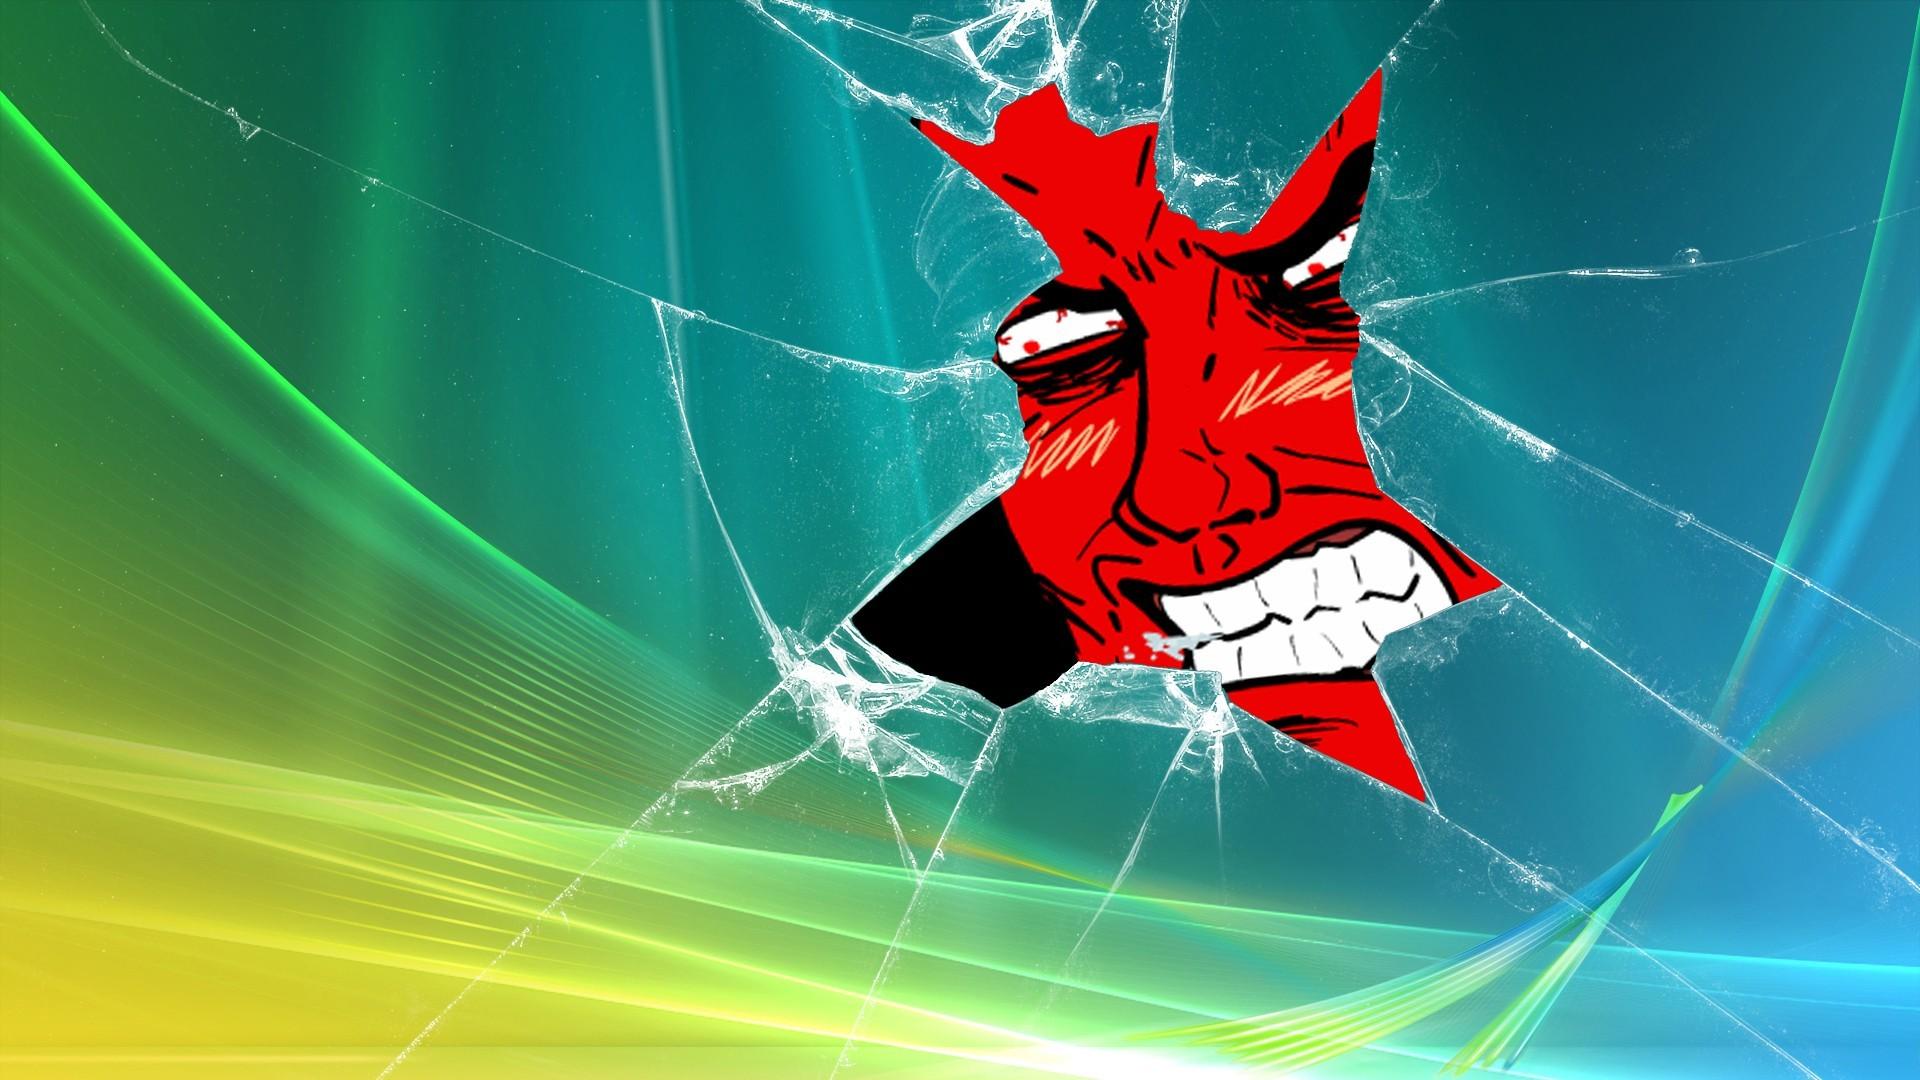 cracked screen wallpaper,graphic design,fictional character,illustration,graphics,animation